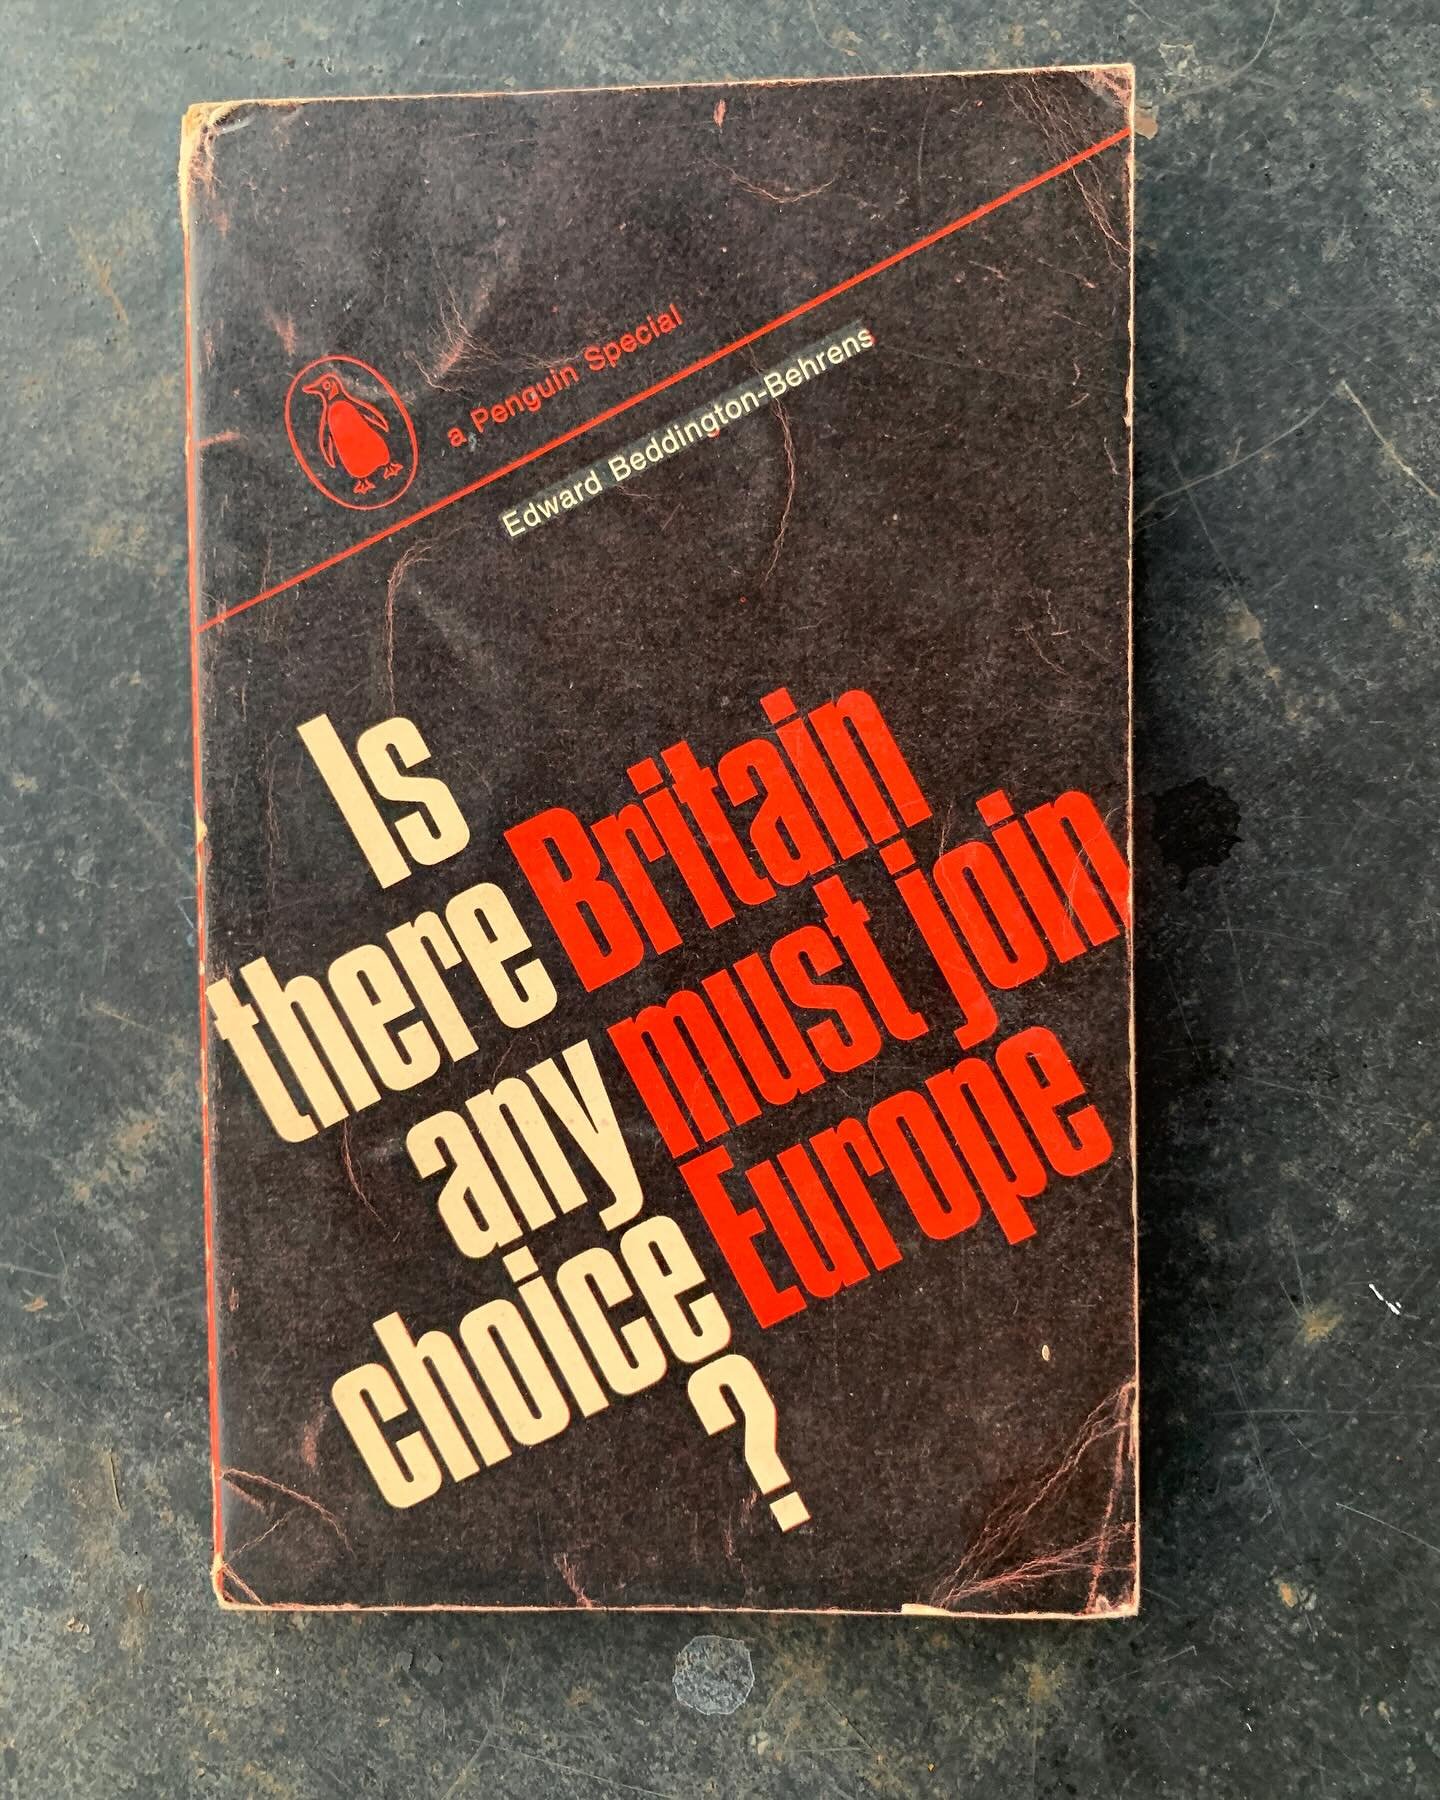 Then and now? One of a box full of Penguin Special Edition books from the 1930&rsquo;s to the 1960&rsquo;s. On everything from venereal disease to nuclear disarmament. Fantastic stuff!
#penguinbooks z
#vintagepenguinbooks 
#vintagepaperbacks 
#pengui